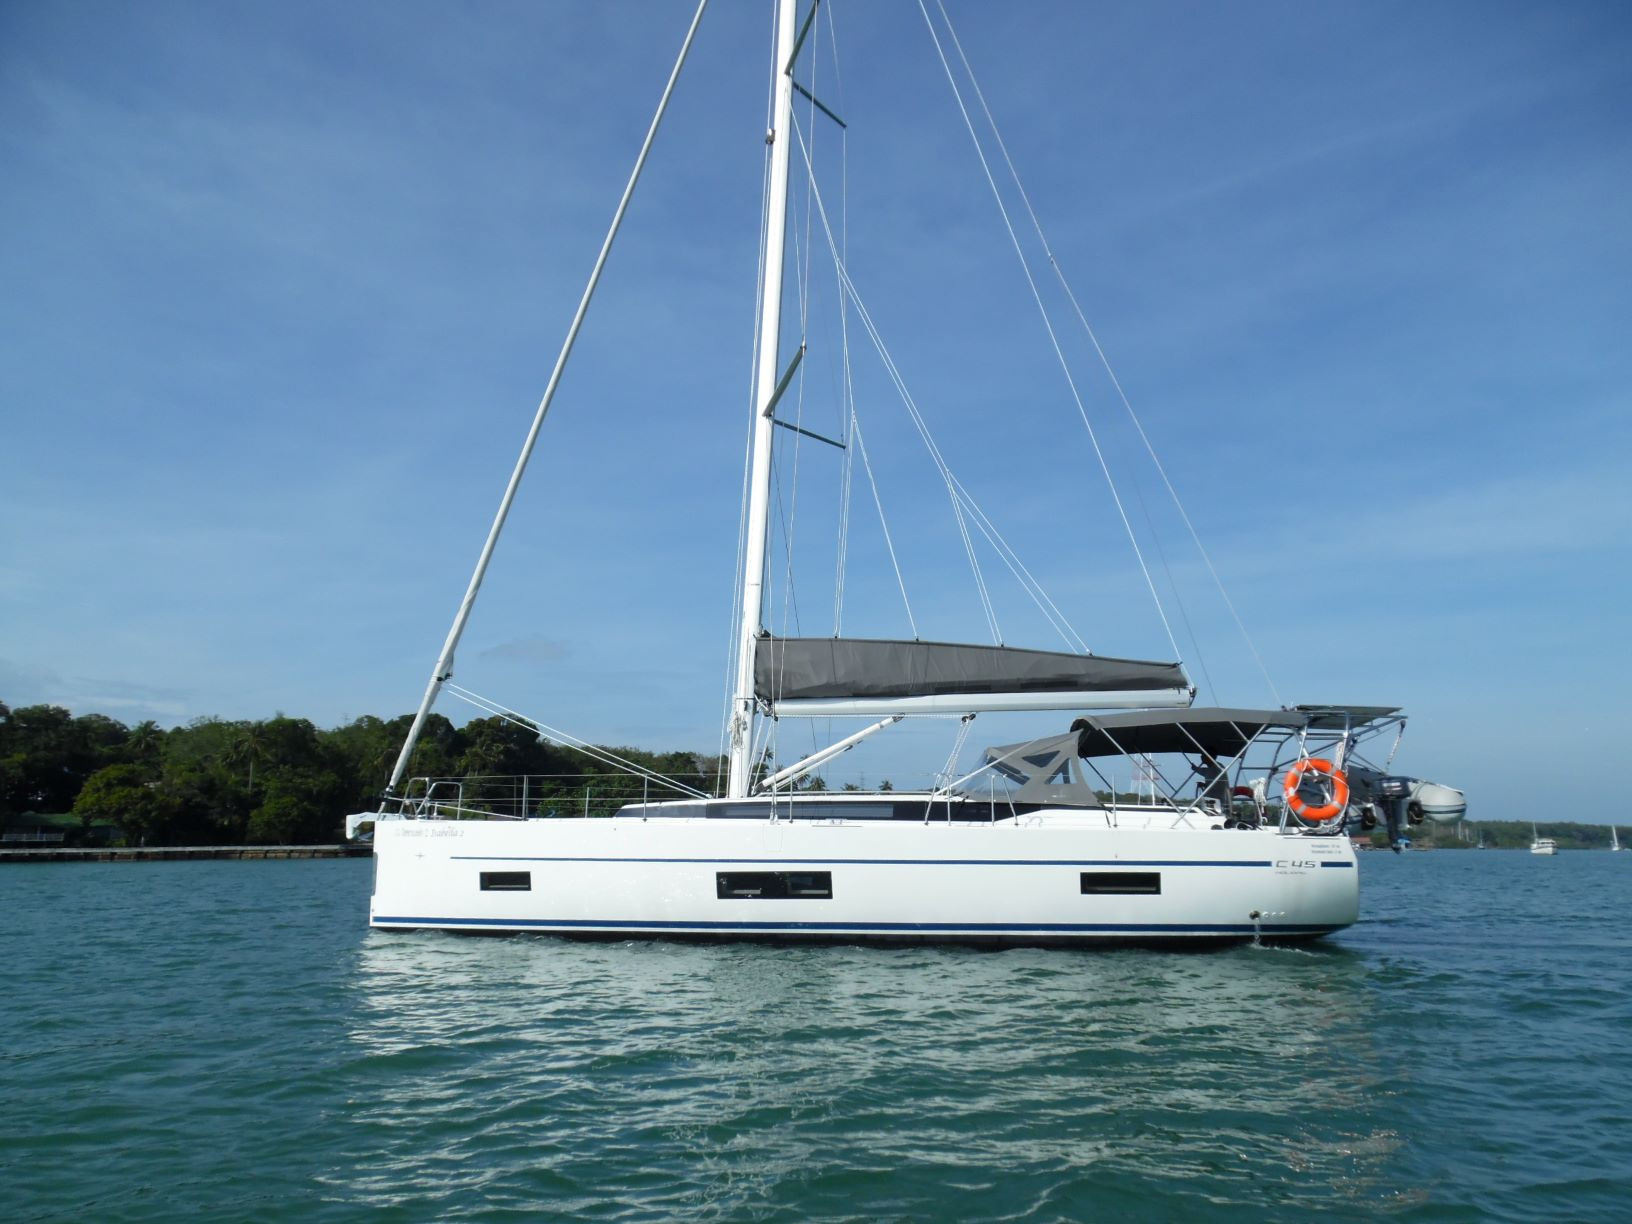 Bavaria 45 Holiday - Yacht Charter Queensland & Boat hire in Australia Queensland Whitsundays Coral Sea Marina 1